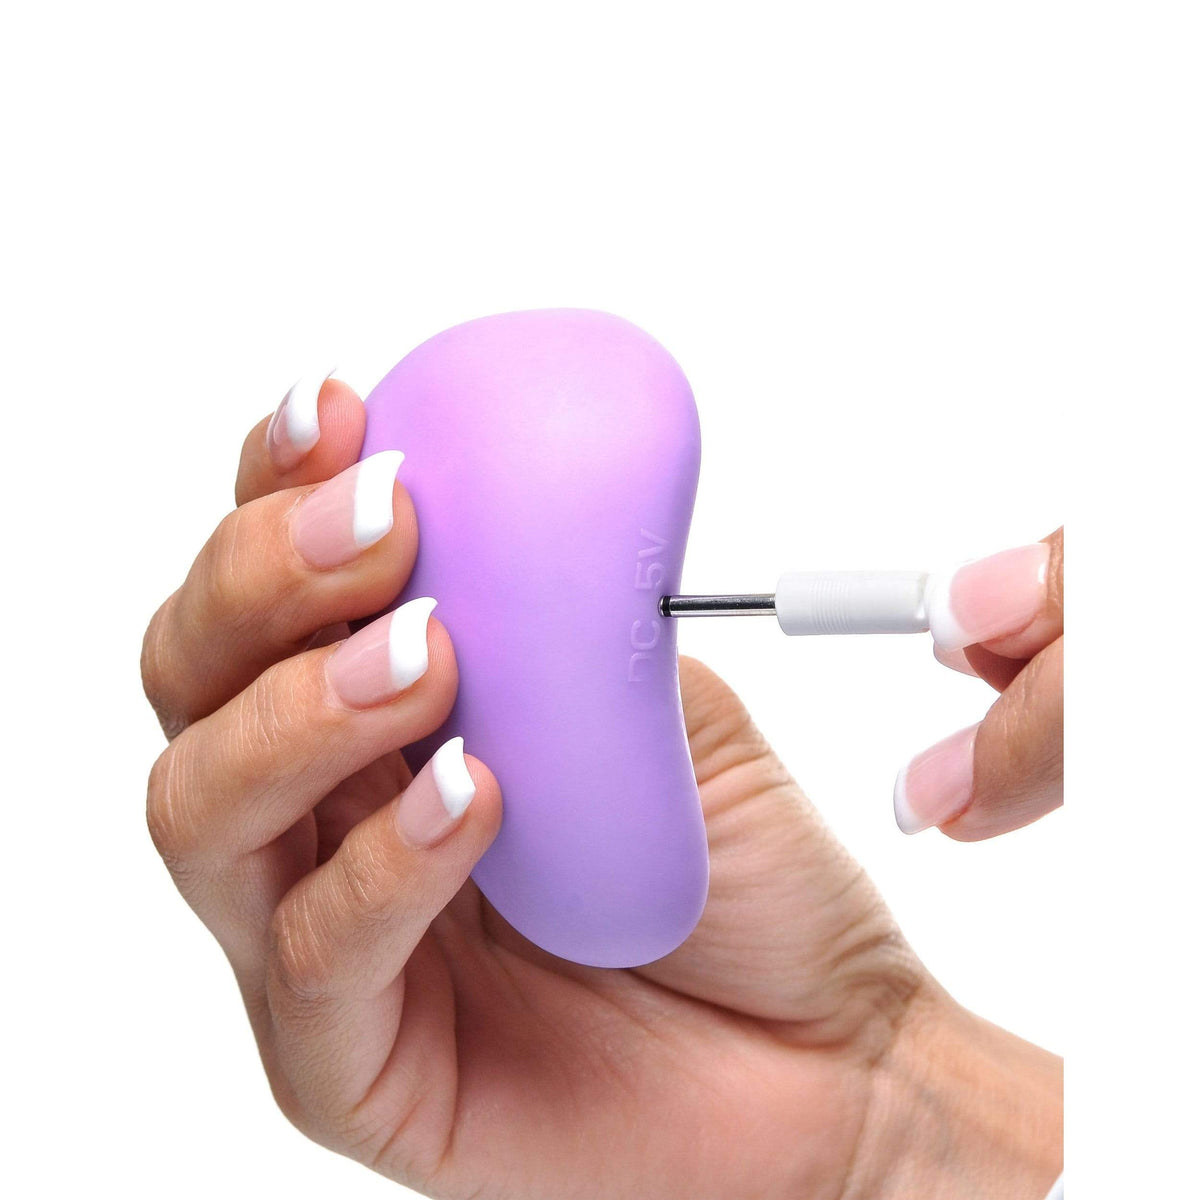 Pipedream - Fantasy For Her Petite Arouse Her Clit Massager (Purple) PD1800 CherryAffairs